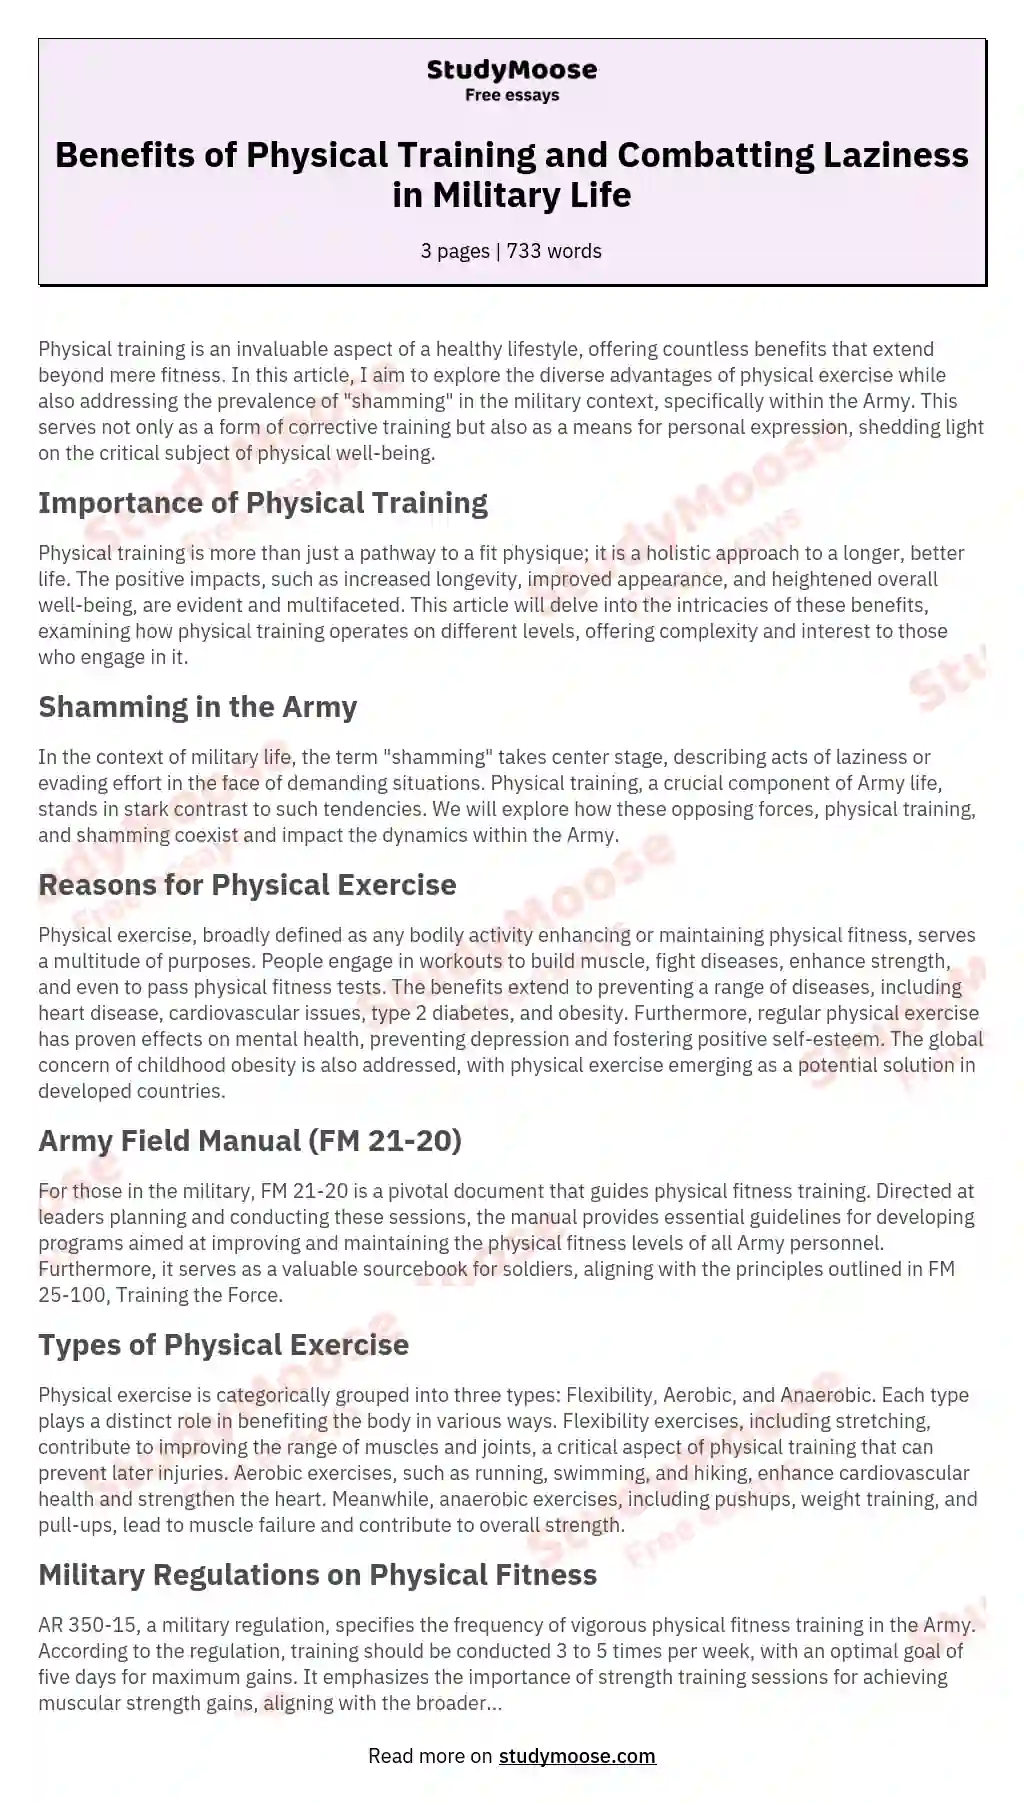 Benefits of Physical Training and Combatting Laziness in Military Life essay